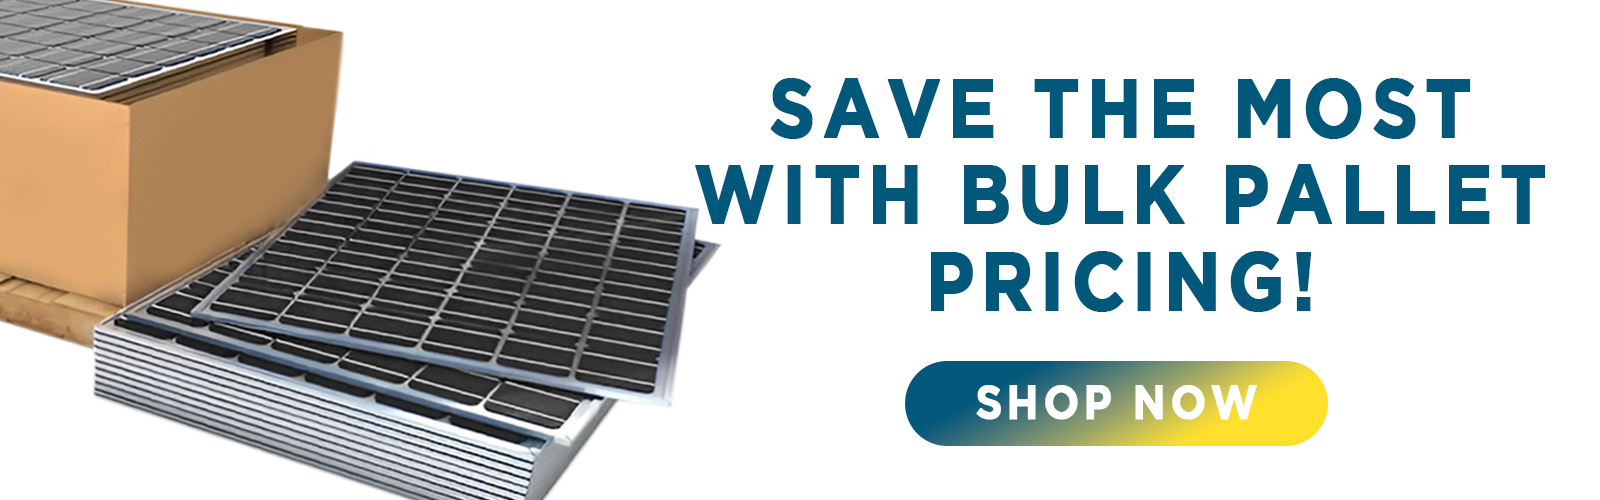 Save the most with bulk pallet pricing. Shop now.